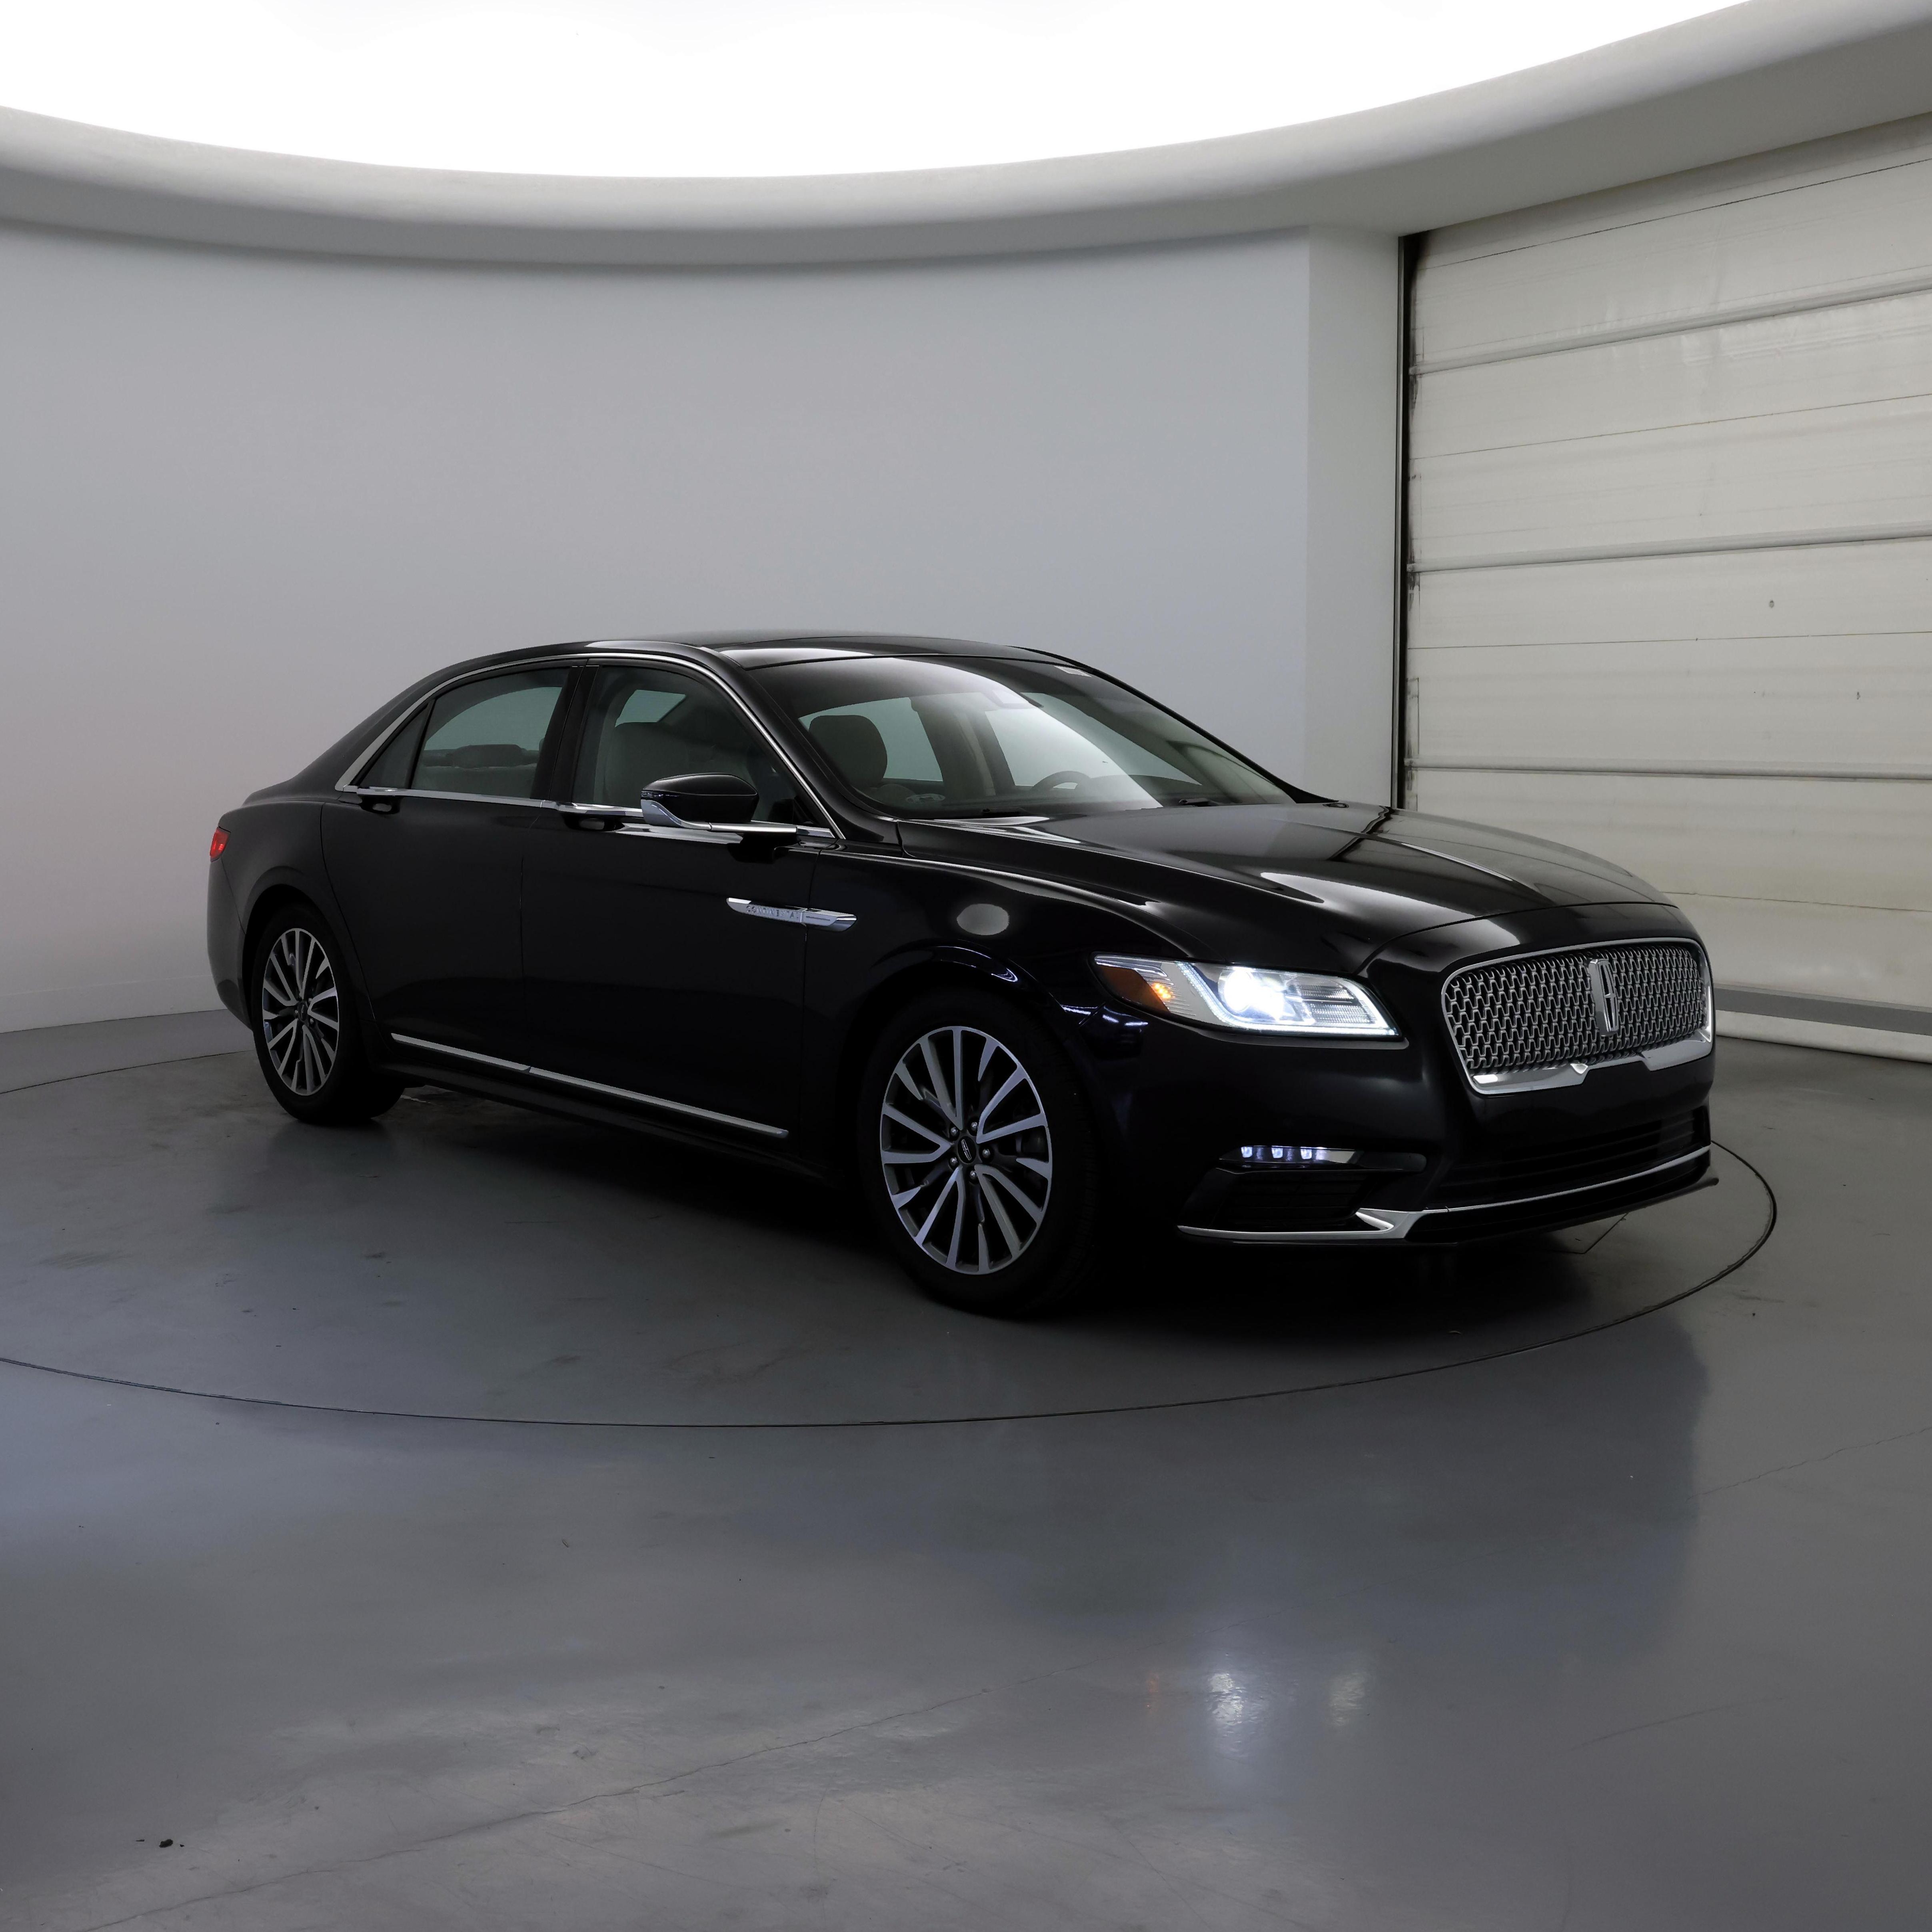 2019 Lincoln Continental Select FWD